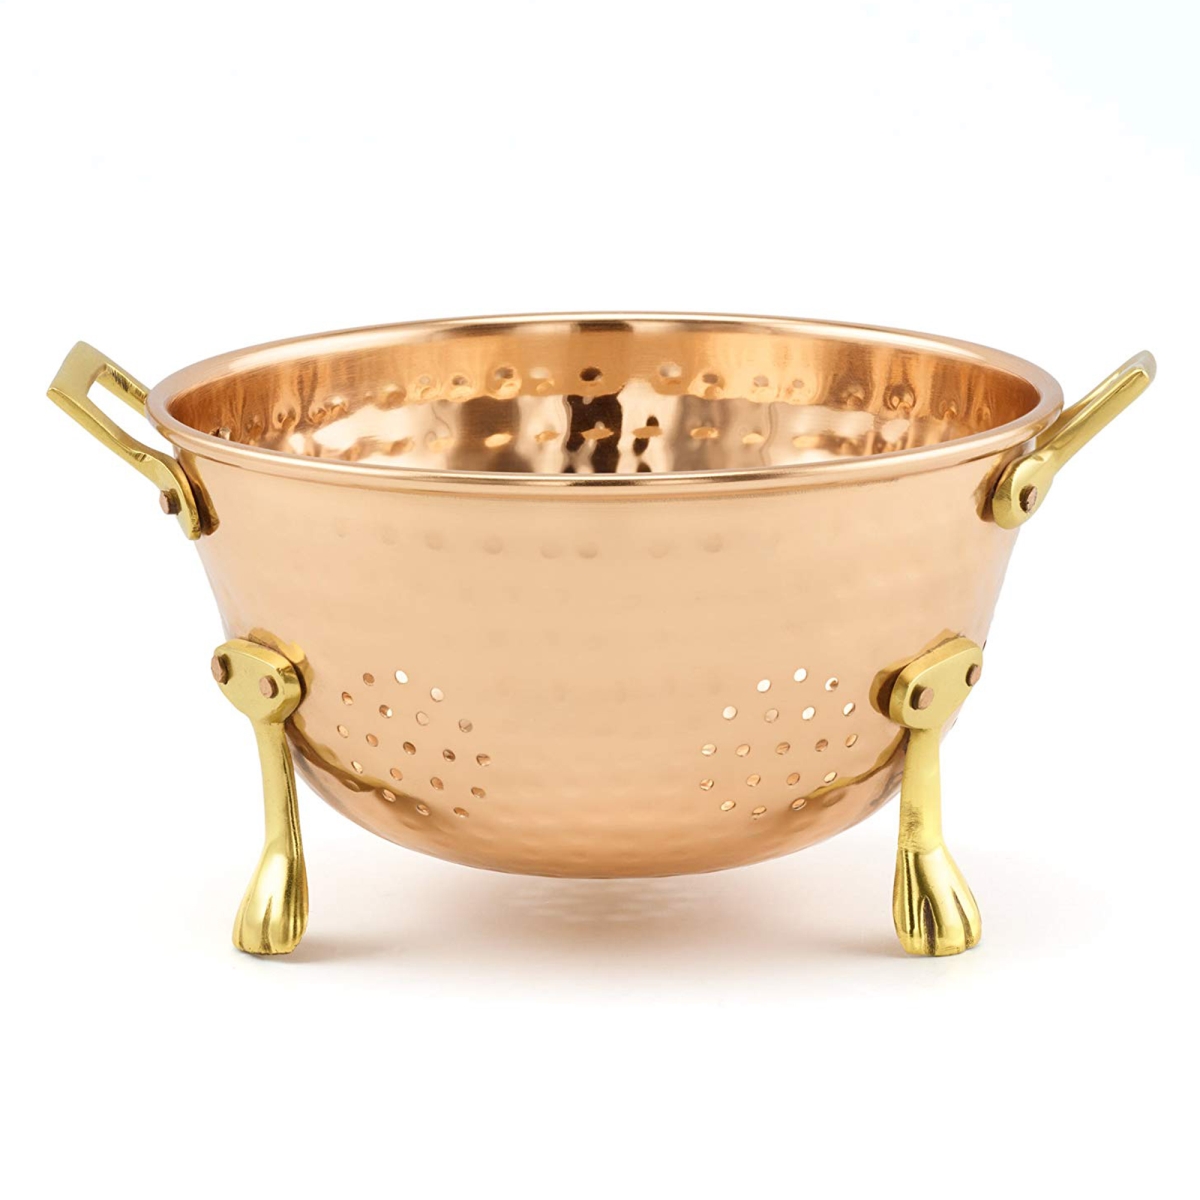 Picture of Nusteel TG-870C 6 in. Copper Hammered Decor Copper Berry Colander